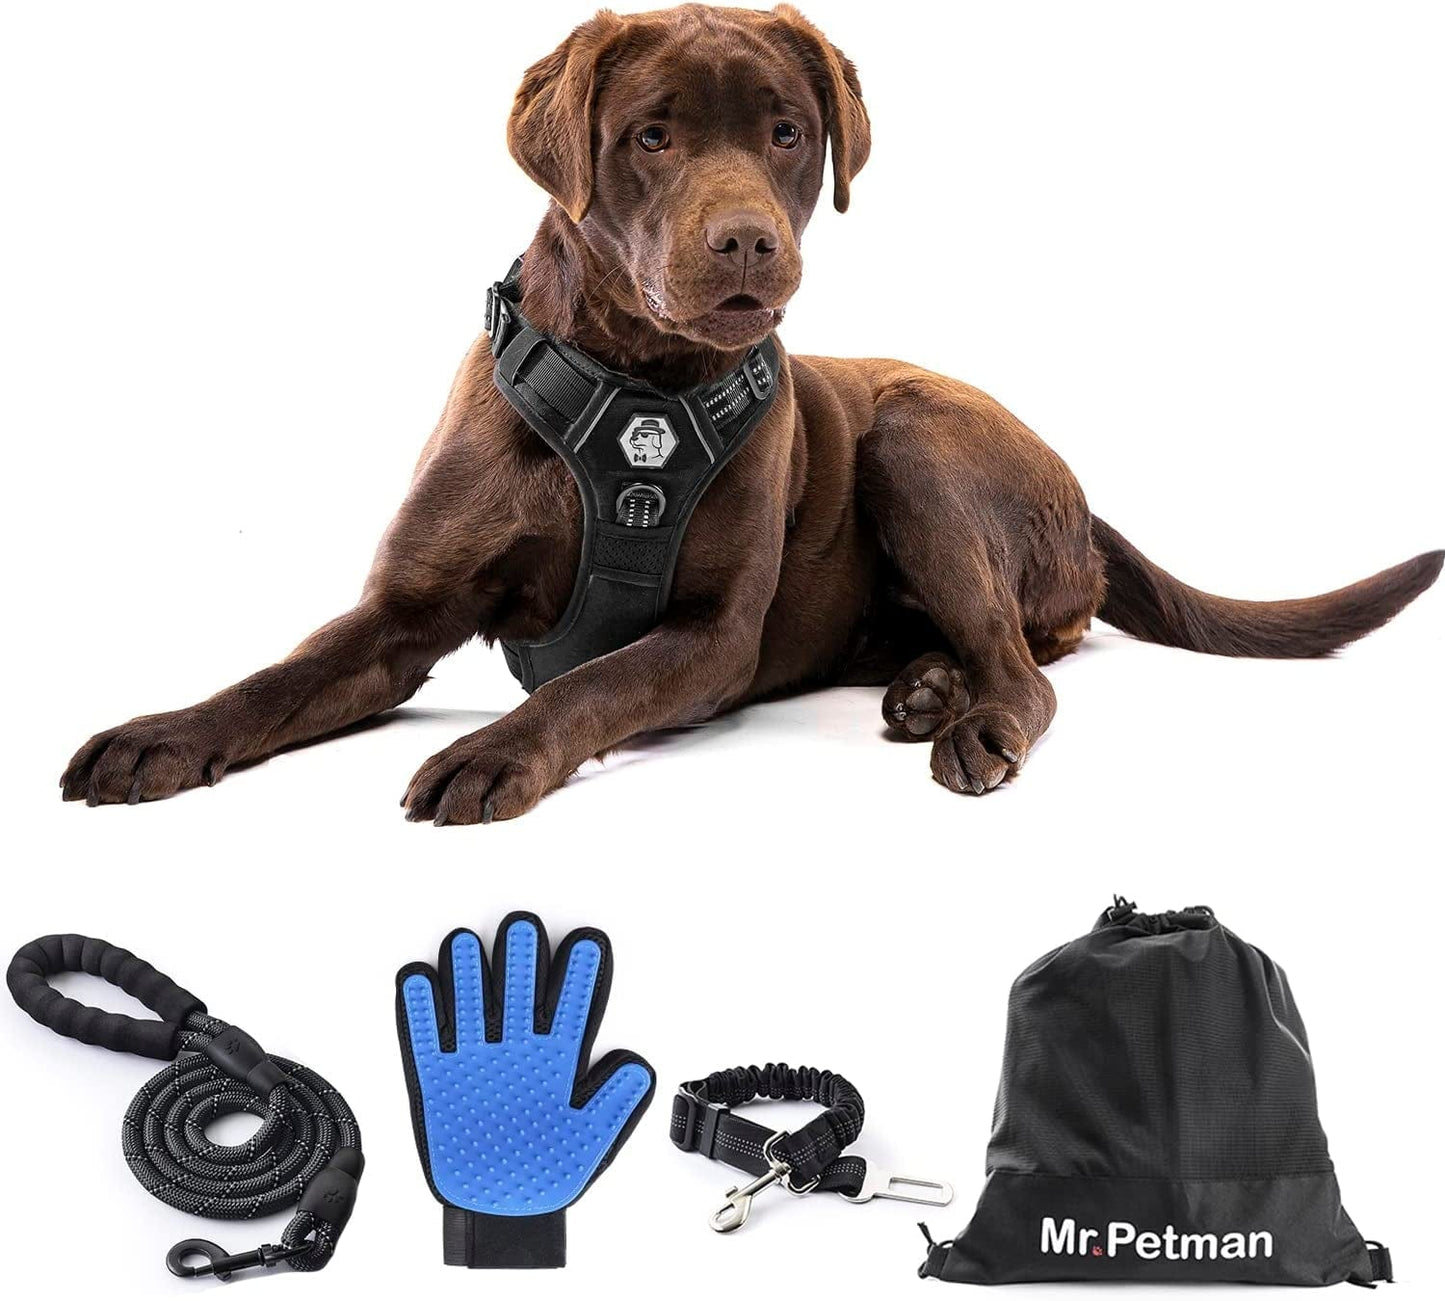 MR. PETMAN No Pull Dog Harness with Leash, Seat Belt, Grooming Glove - No Choke Dog Harness Set for Small Medium Large Dogs- Reflective Adjustable Dog Vest Harnesses with Handle for Walking Training Animals & Pet Supplies > Pet Supplies > Dog Supplies > Dog Apparel Mr. Petman Classic Black Large 